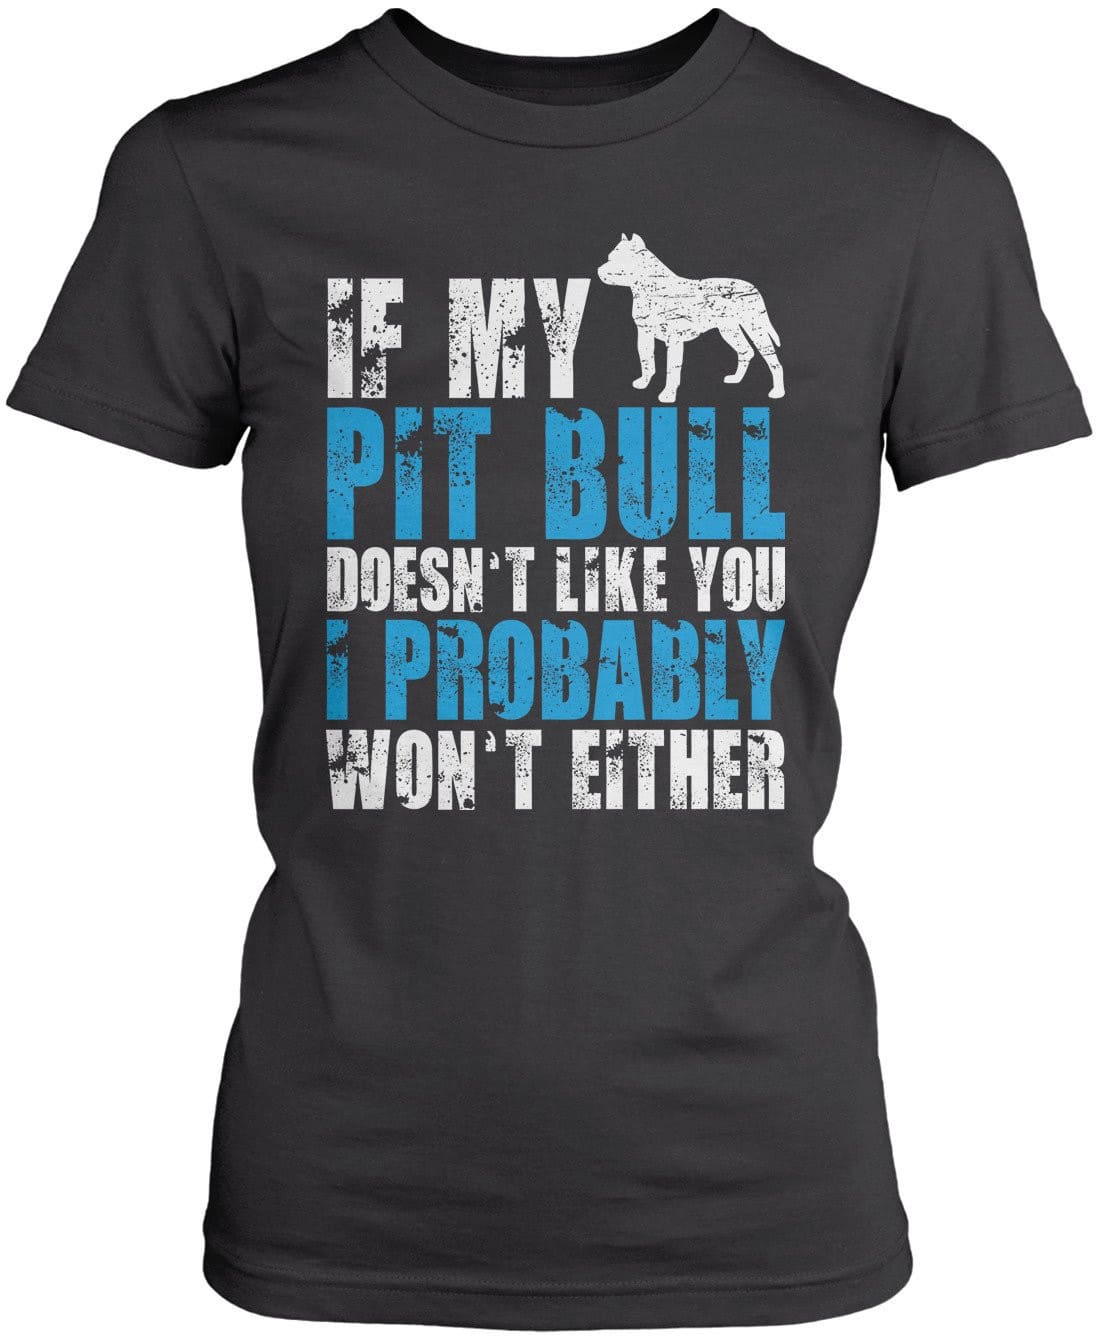 If My Pit Bull Doesn't Like You T-Shirt